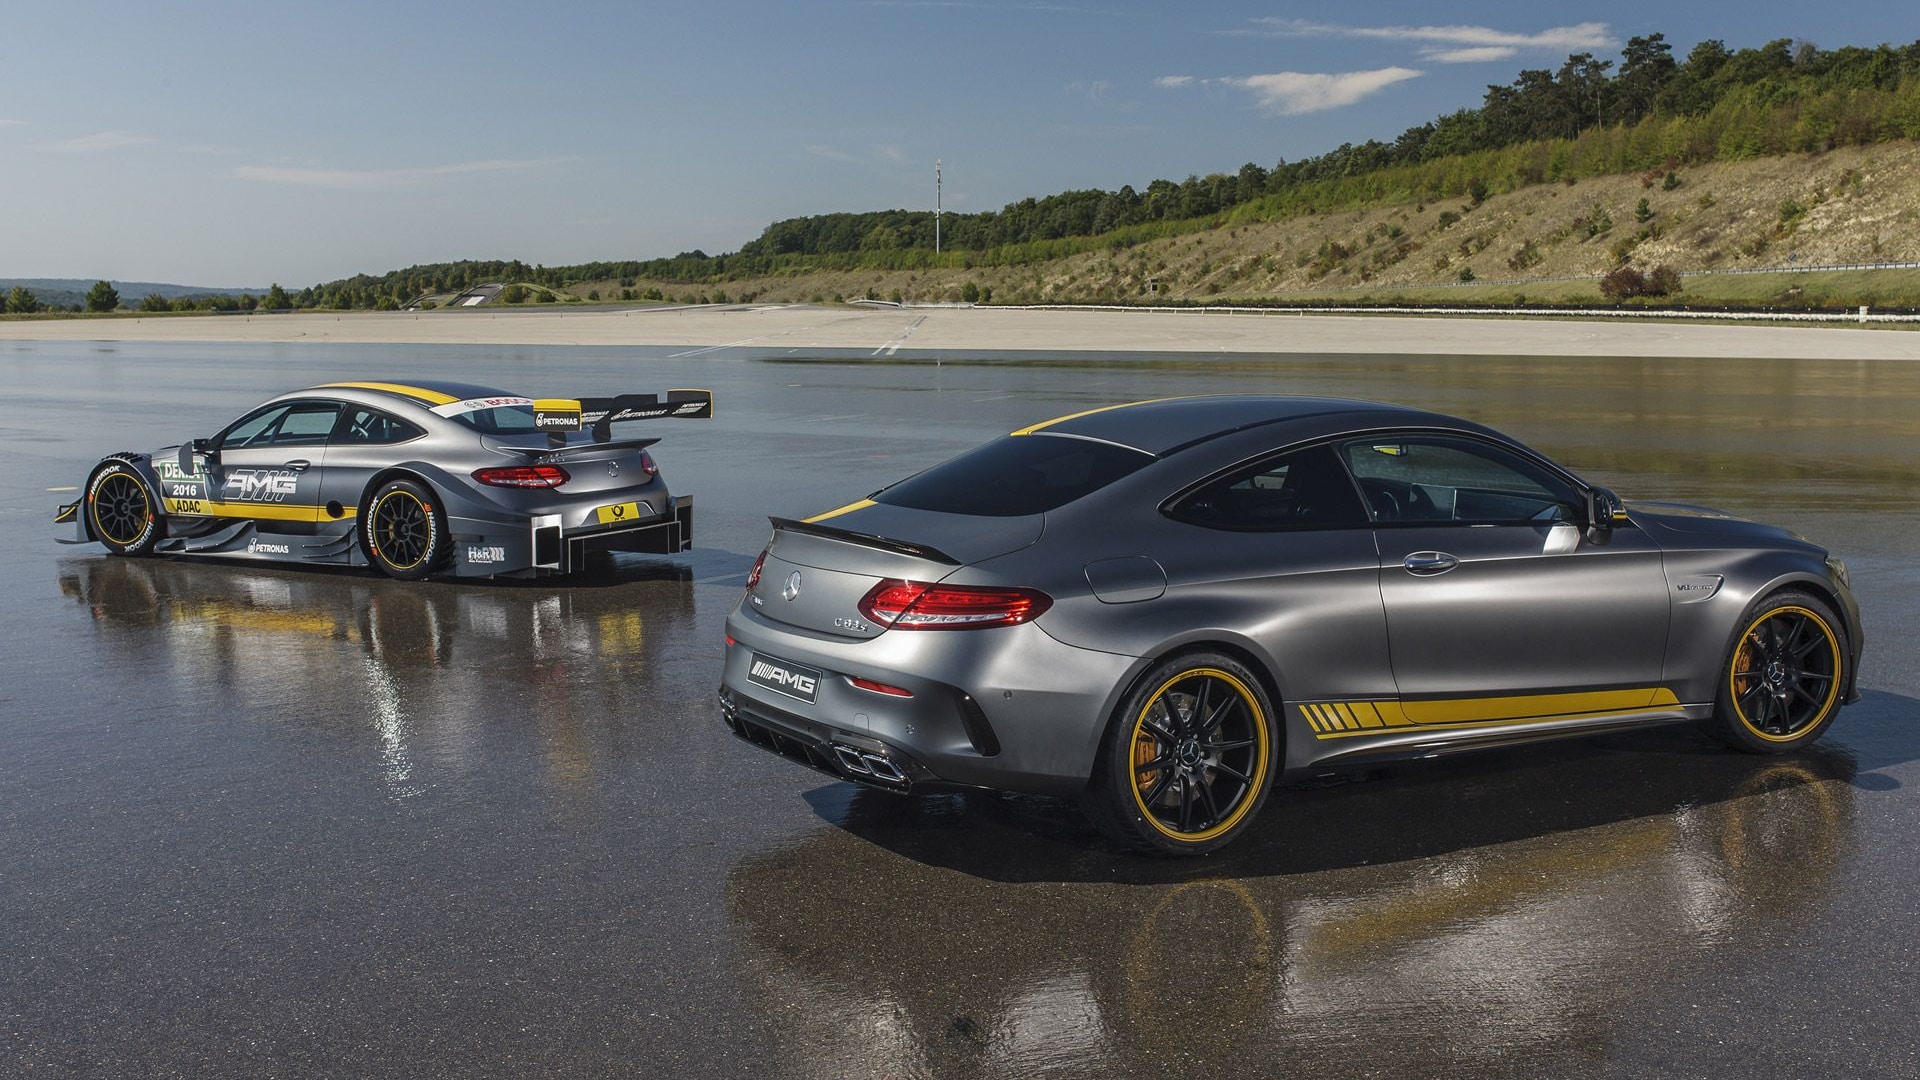 2017 Mercedes-AMG C63 Coupe Edition 1 and 2016 C63 DTM race car